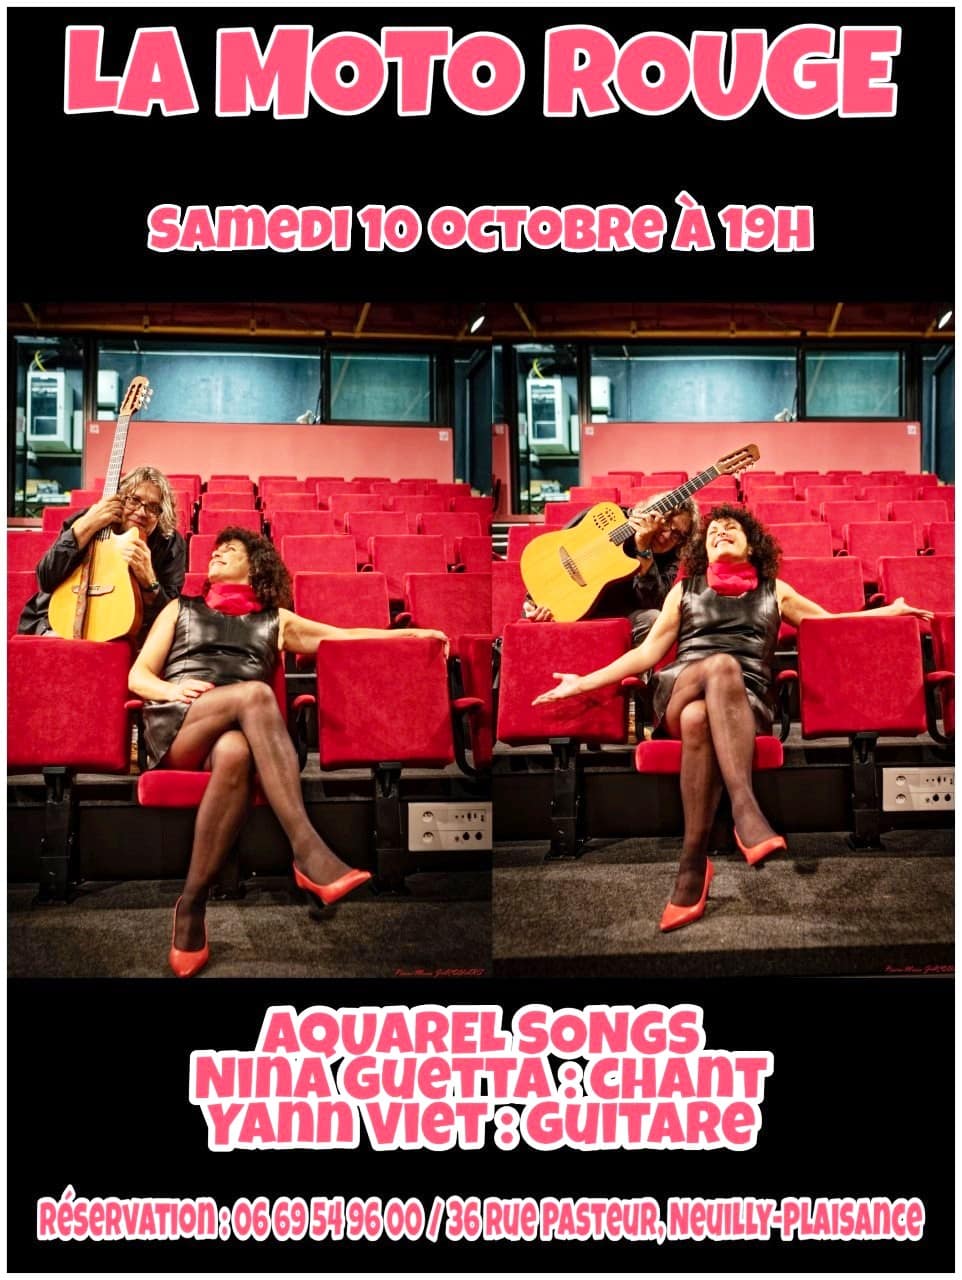 Concert at the Moto Rouge at Neuilly Plaisance, saturday the 10.10.2020. French Song